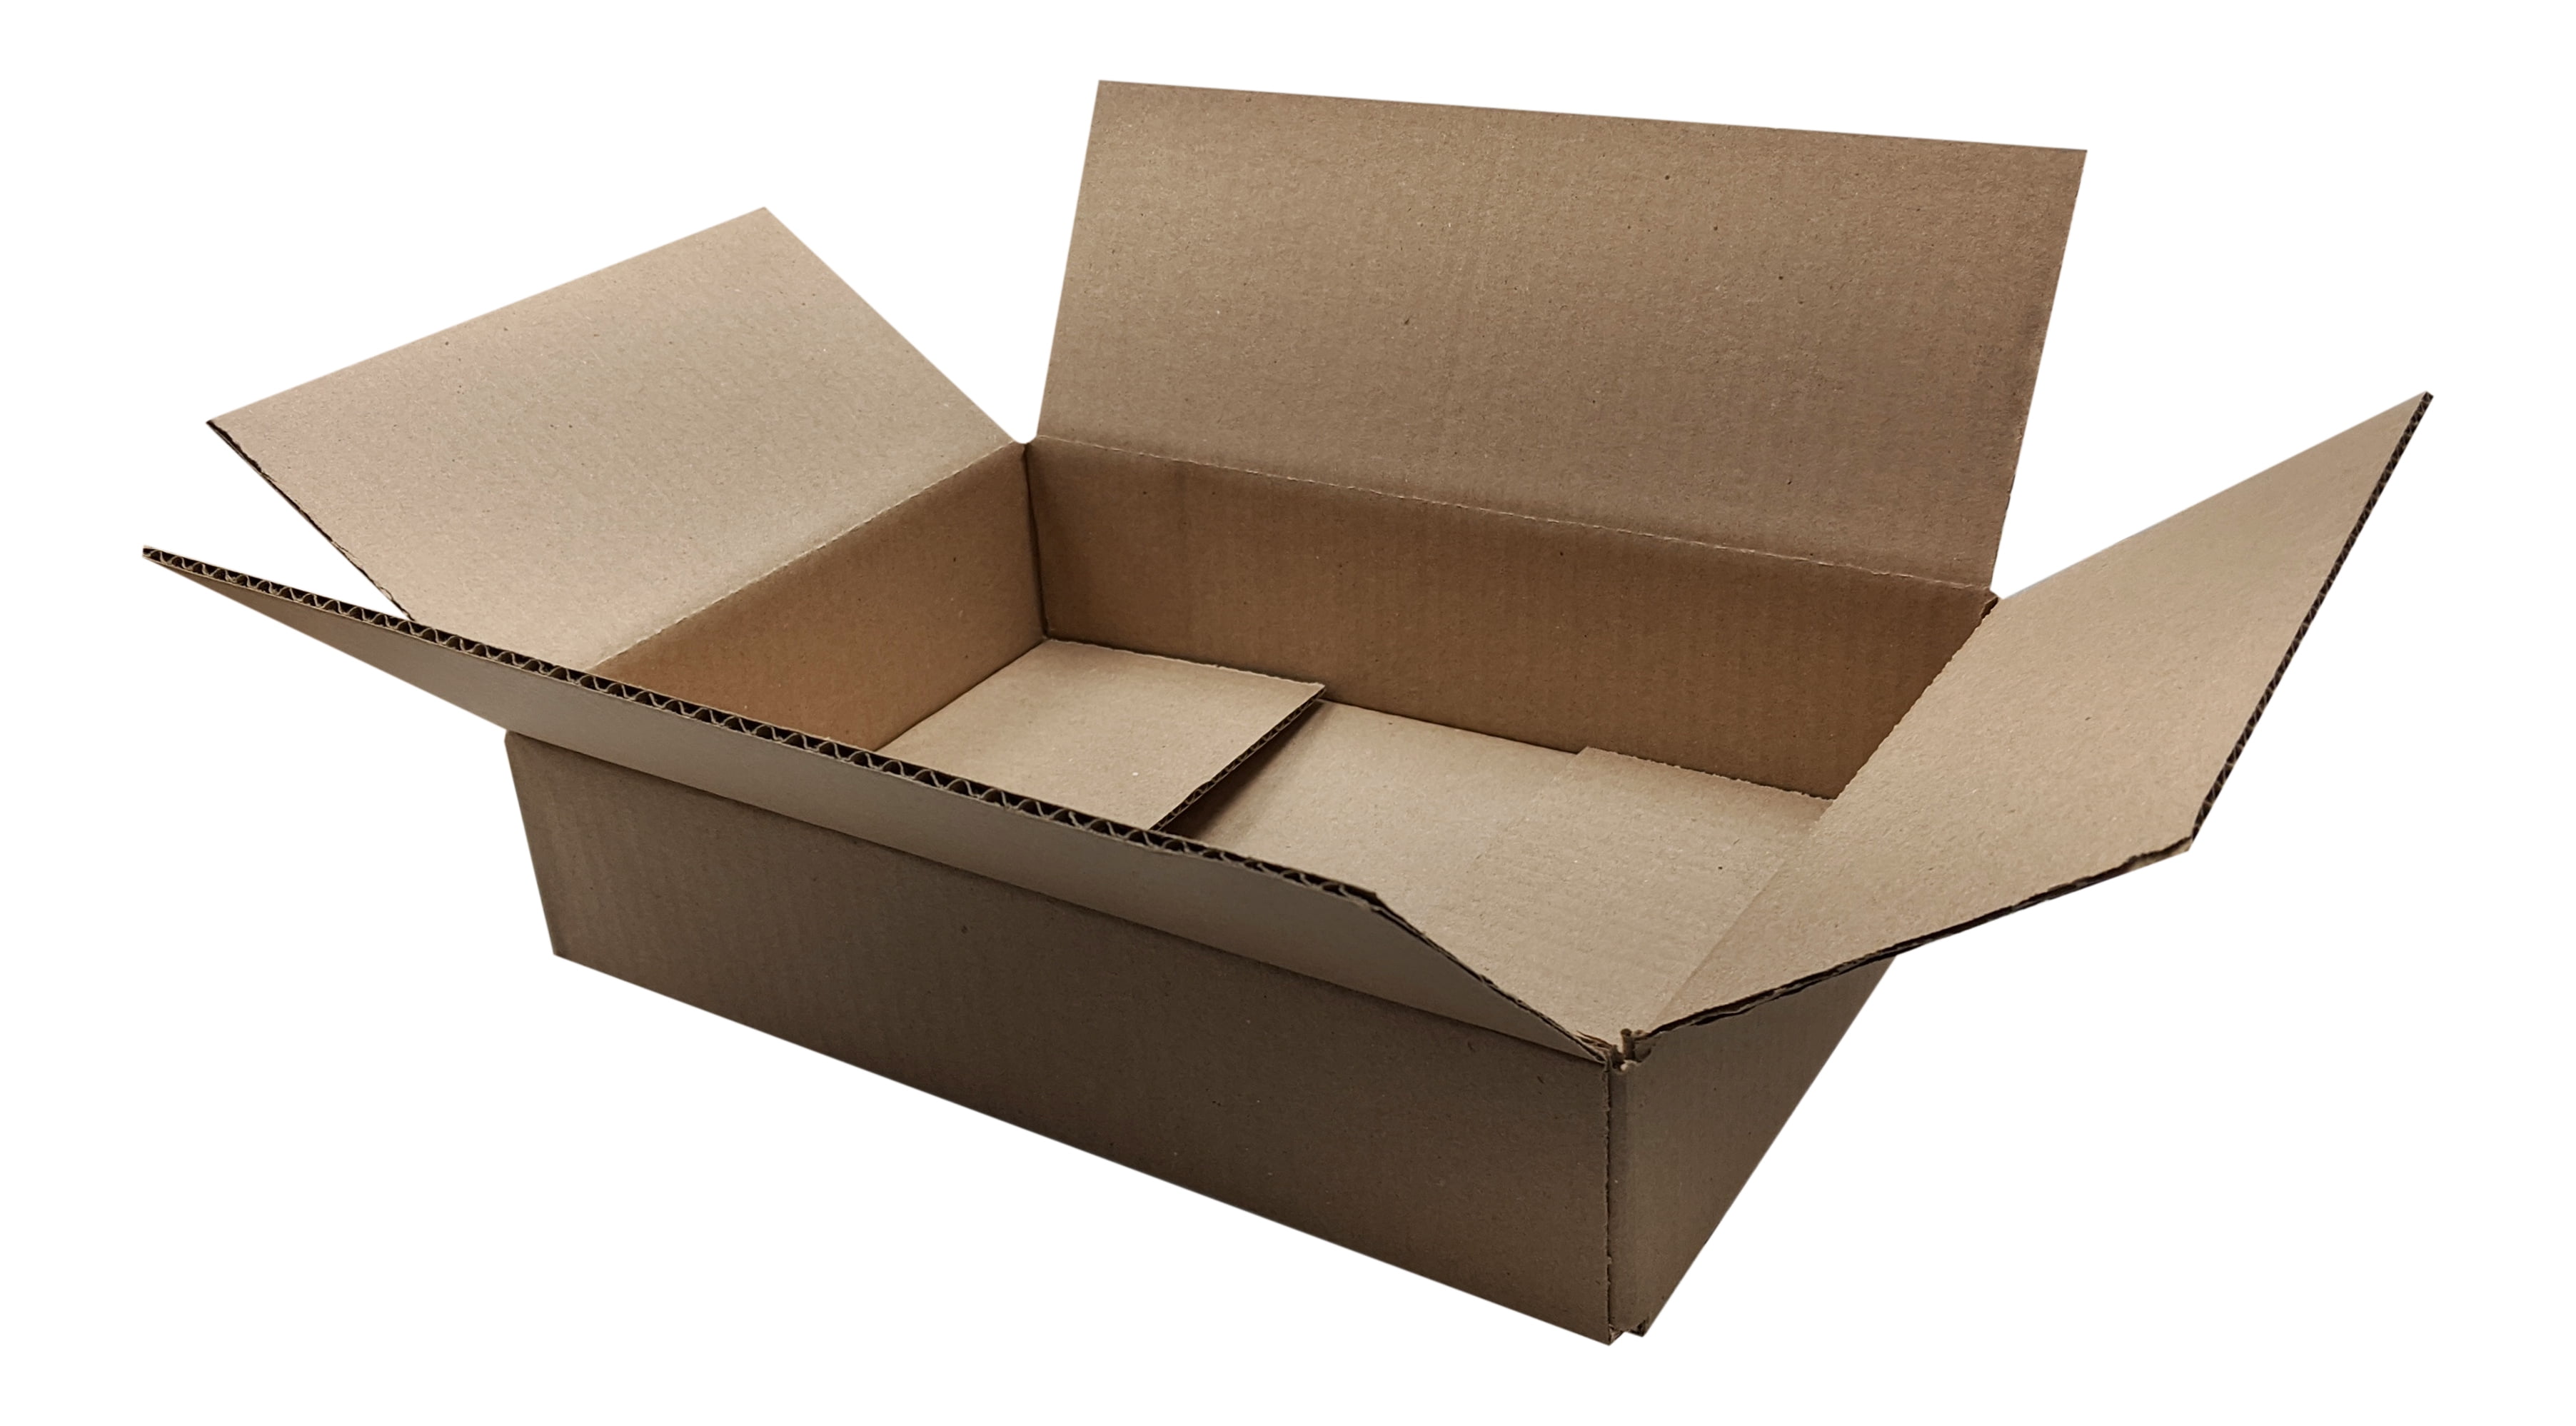 50 12x10x3 Shipping Packing Mailing Moving Boxes Corrugated Cartons Storage Box 